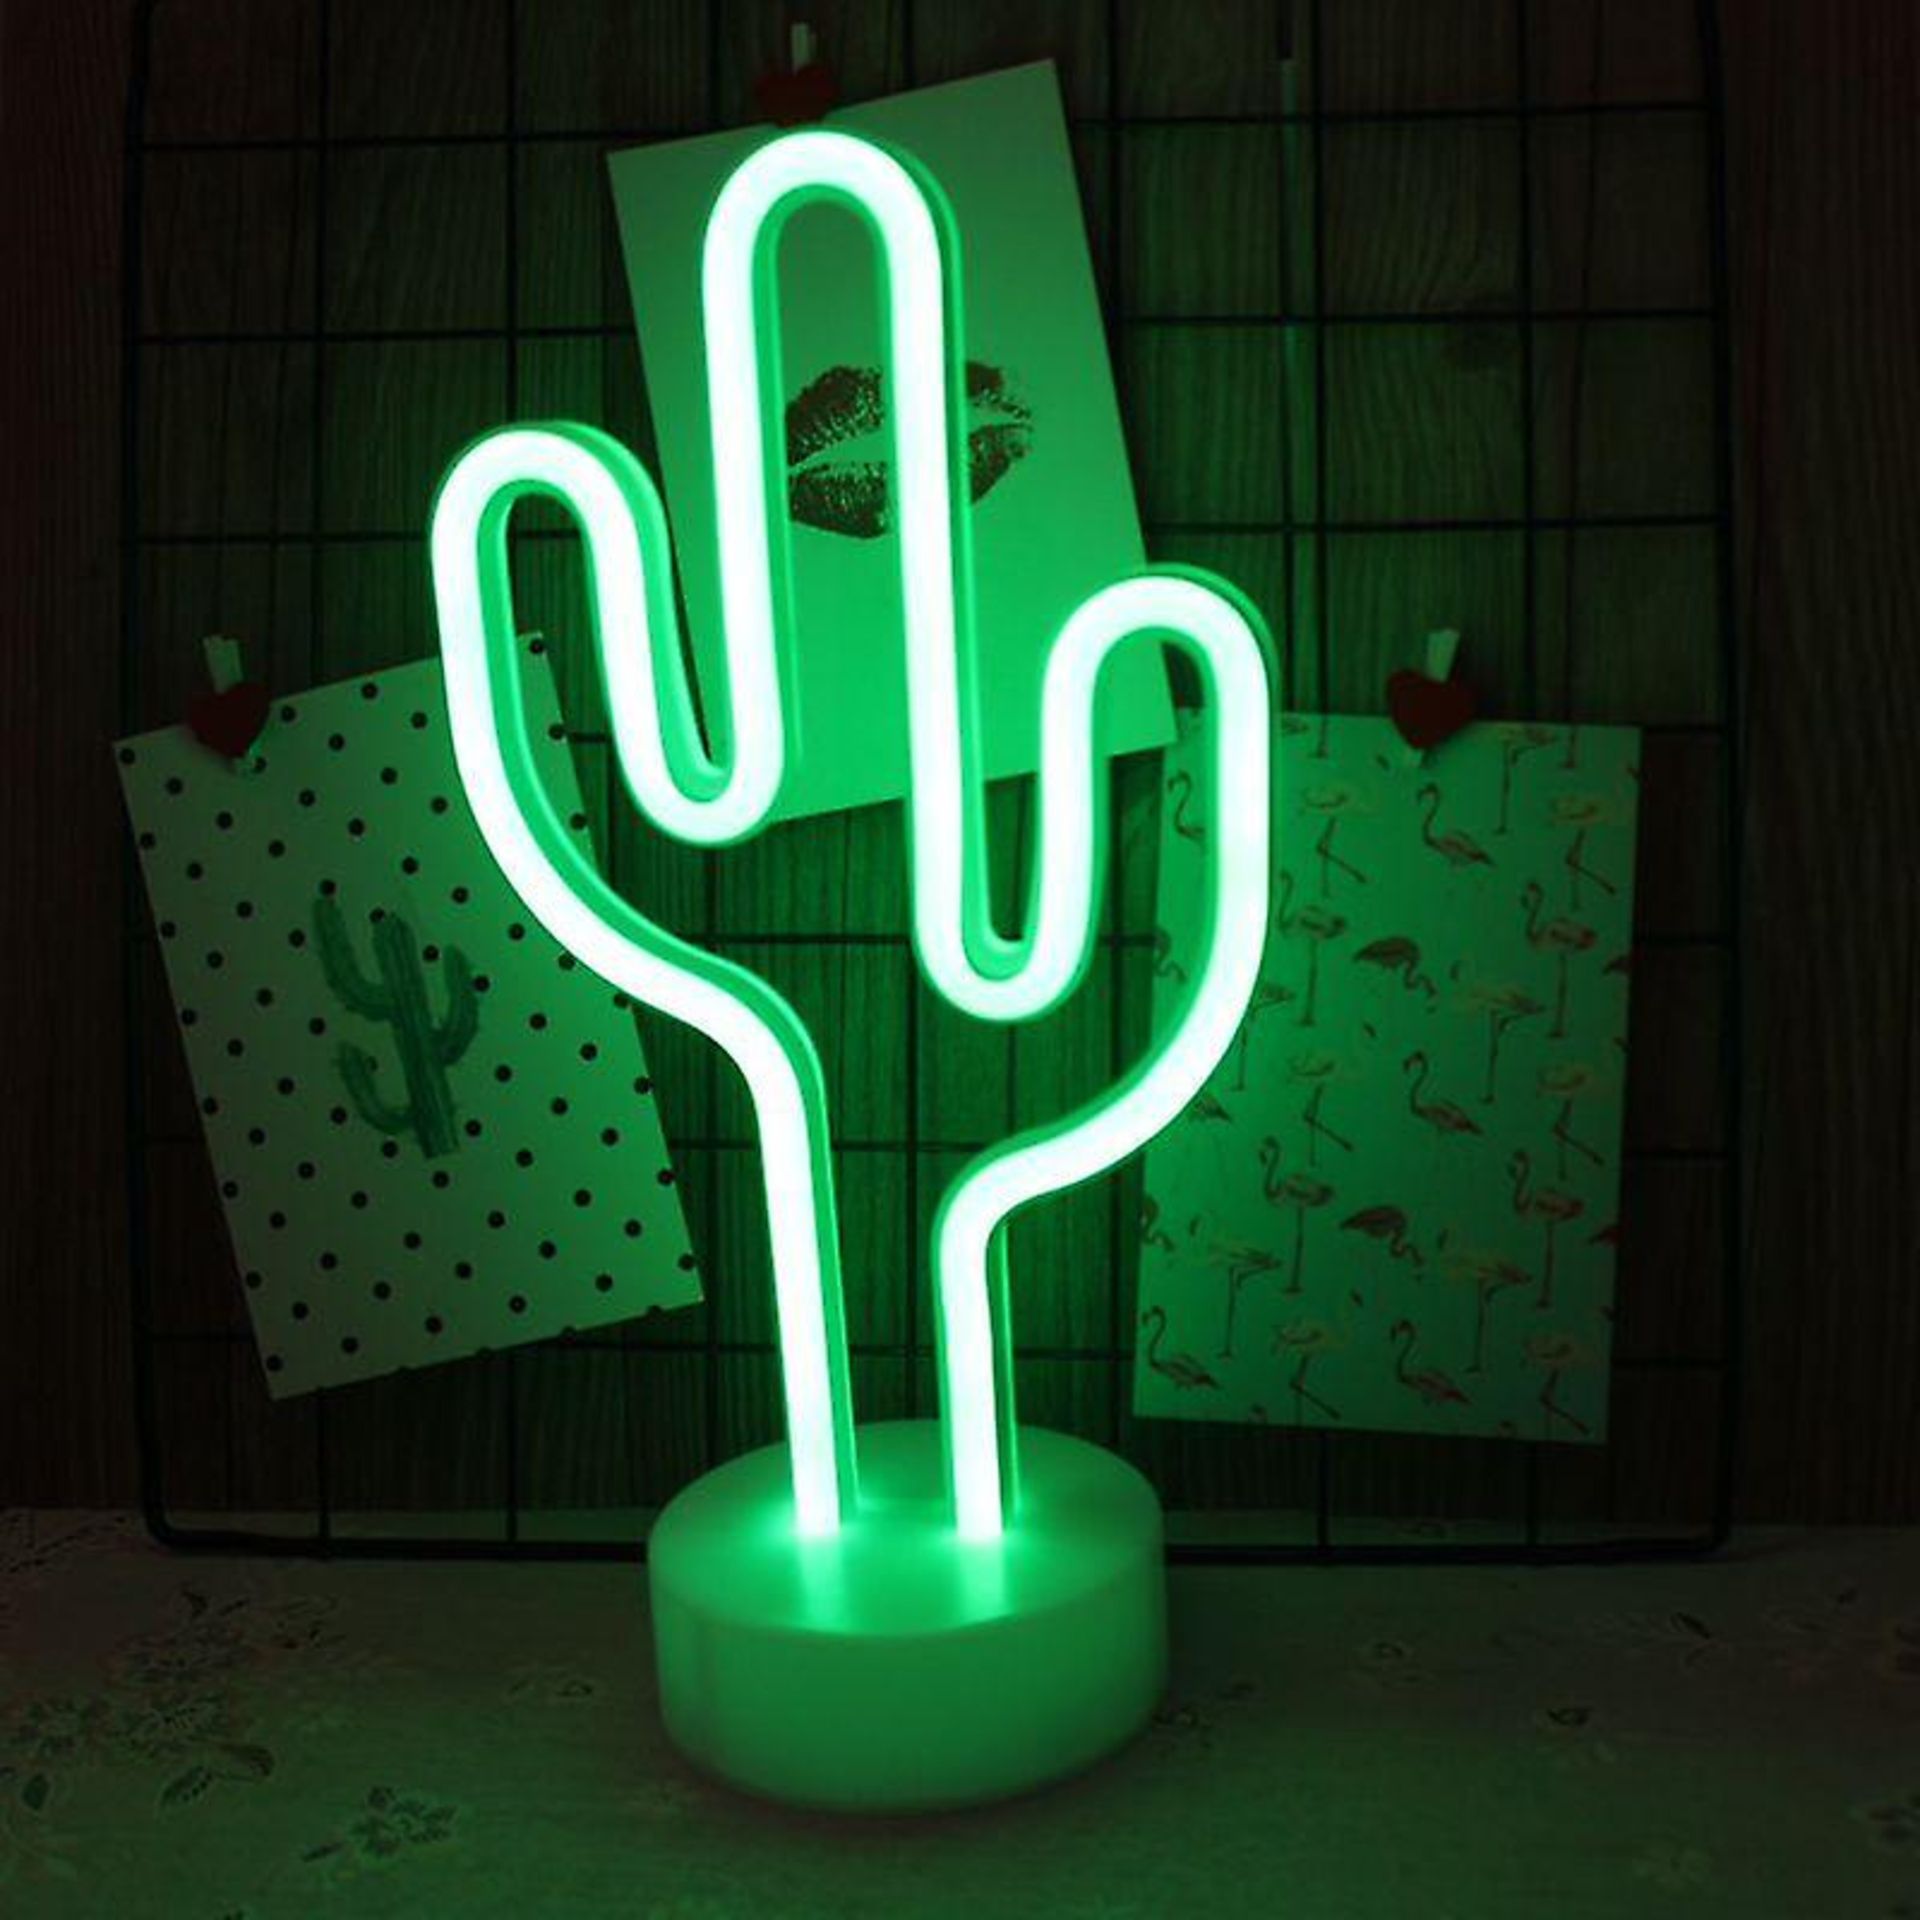 20 X BRAND NEW CACTUS NEON NIGHTLIGHTS - IN 1 OUTER BOX - RRP £12 (EBAY) / £15 (AMAZON) - REQUIRES 3 - Image 3 of 3